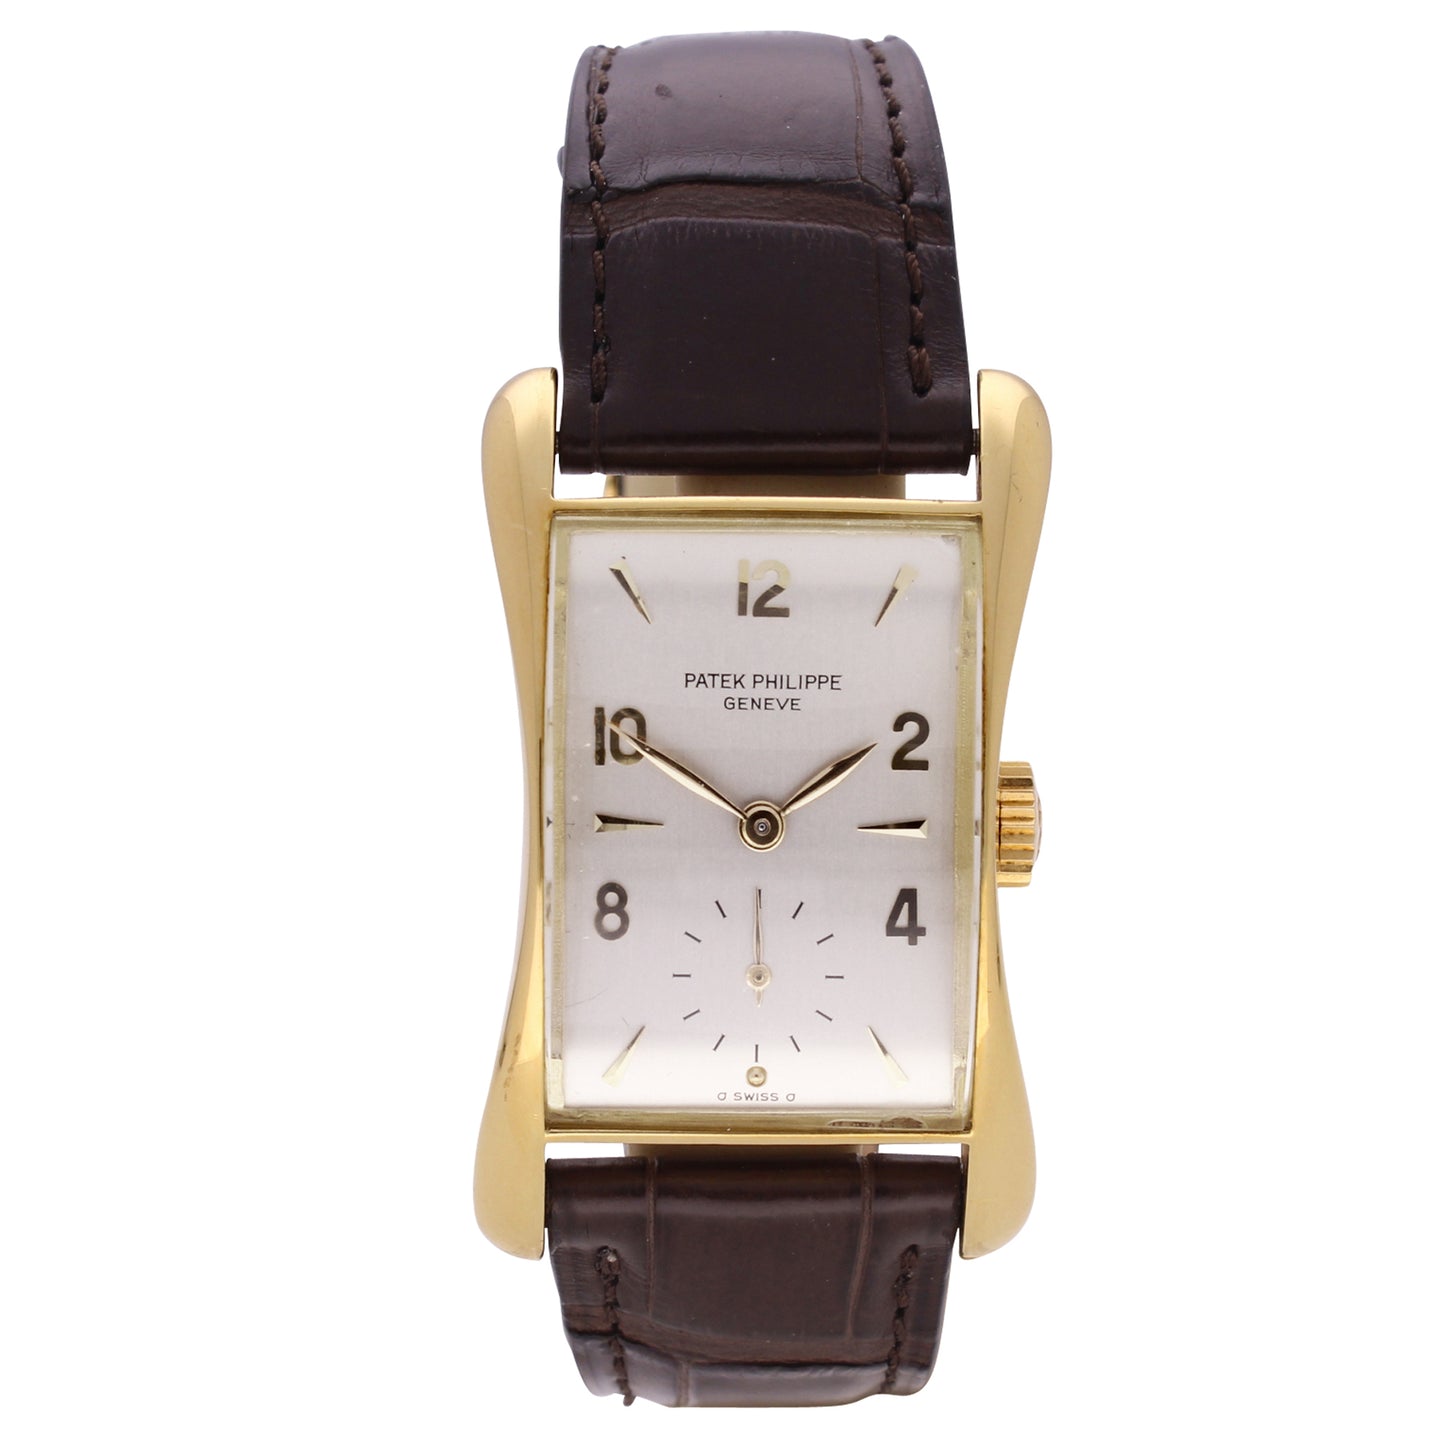 18ct yellow gold Patek Philippe, reference 2442 "Marilyn Monroe" wristwatch. Made 1953